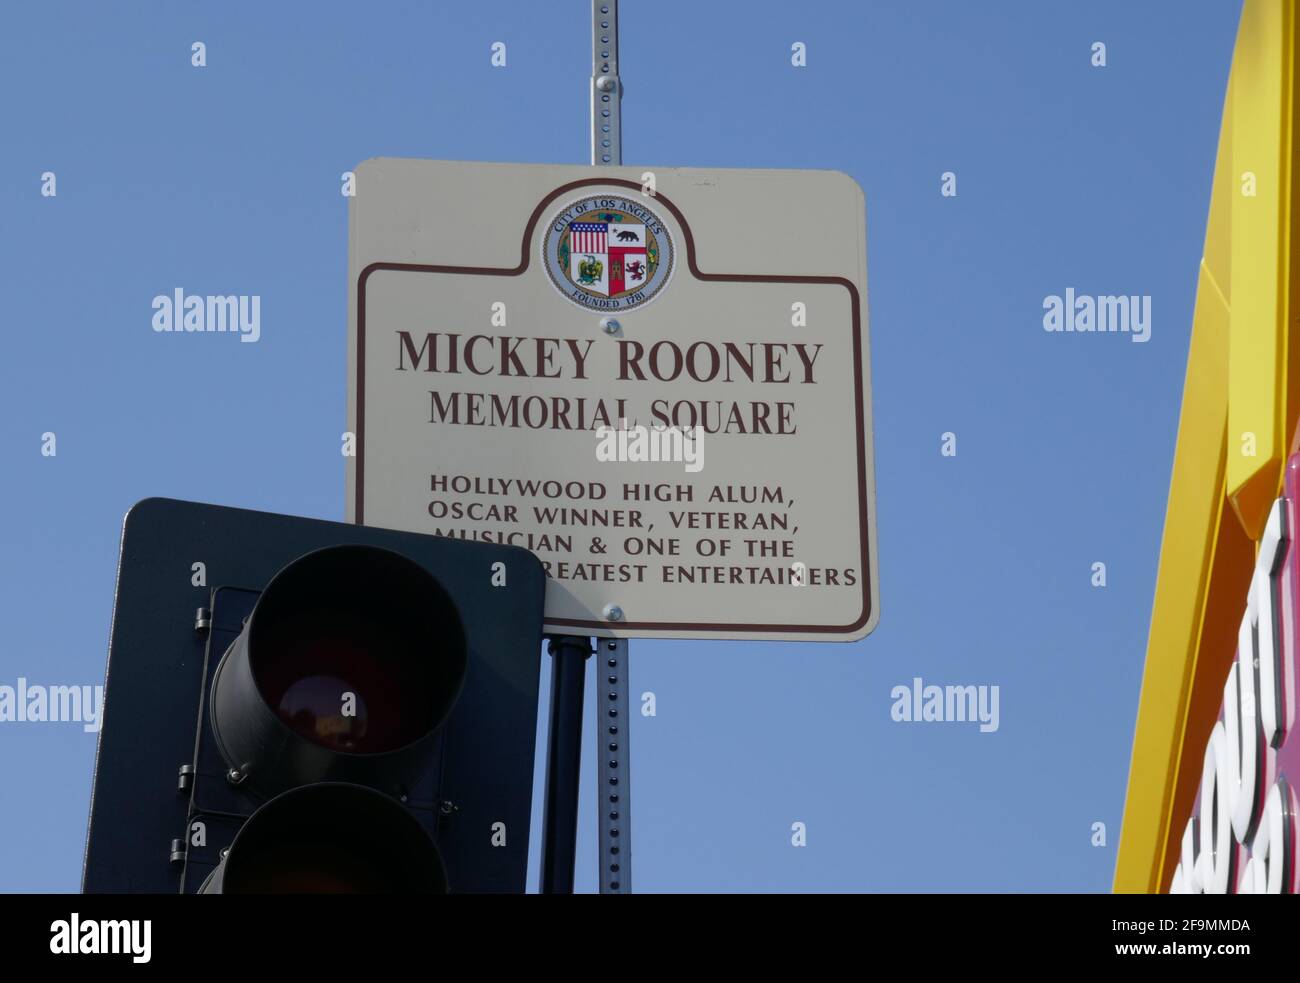 Hollywood, California, USA 17th April 2021 A general view of atmosphere of Mickey Rooney Memorial Square at Hollywood Walk of Fame on April 17, 2021 in Hollywood, California, USA. Photo by Barry King/Alamy Stock Photo Stock Photo